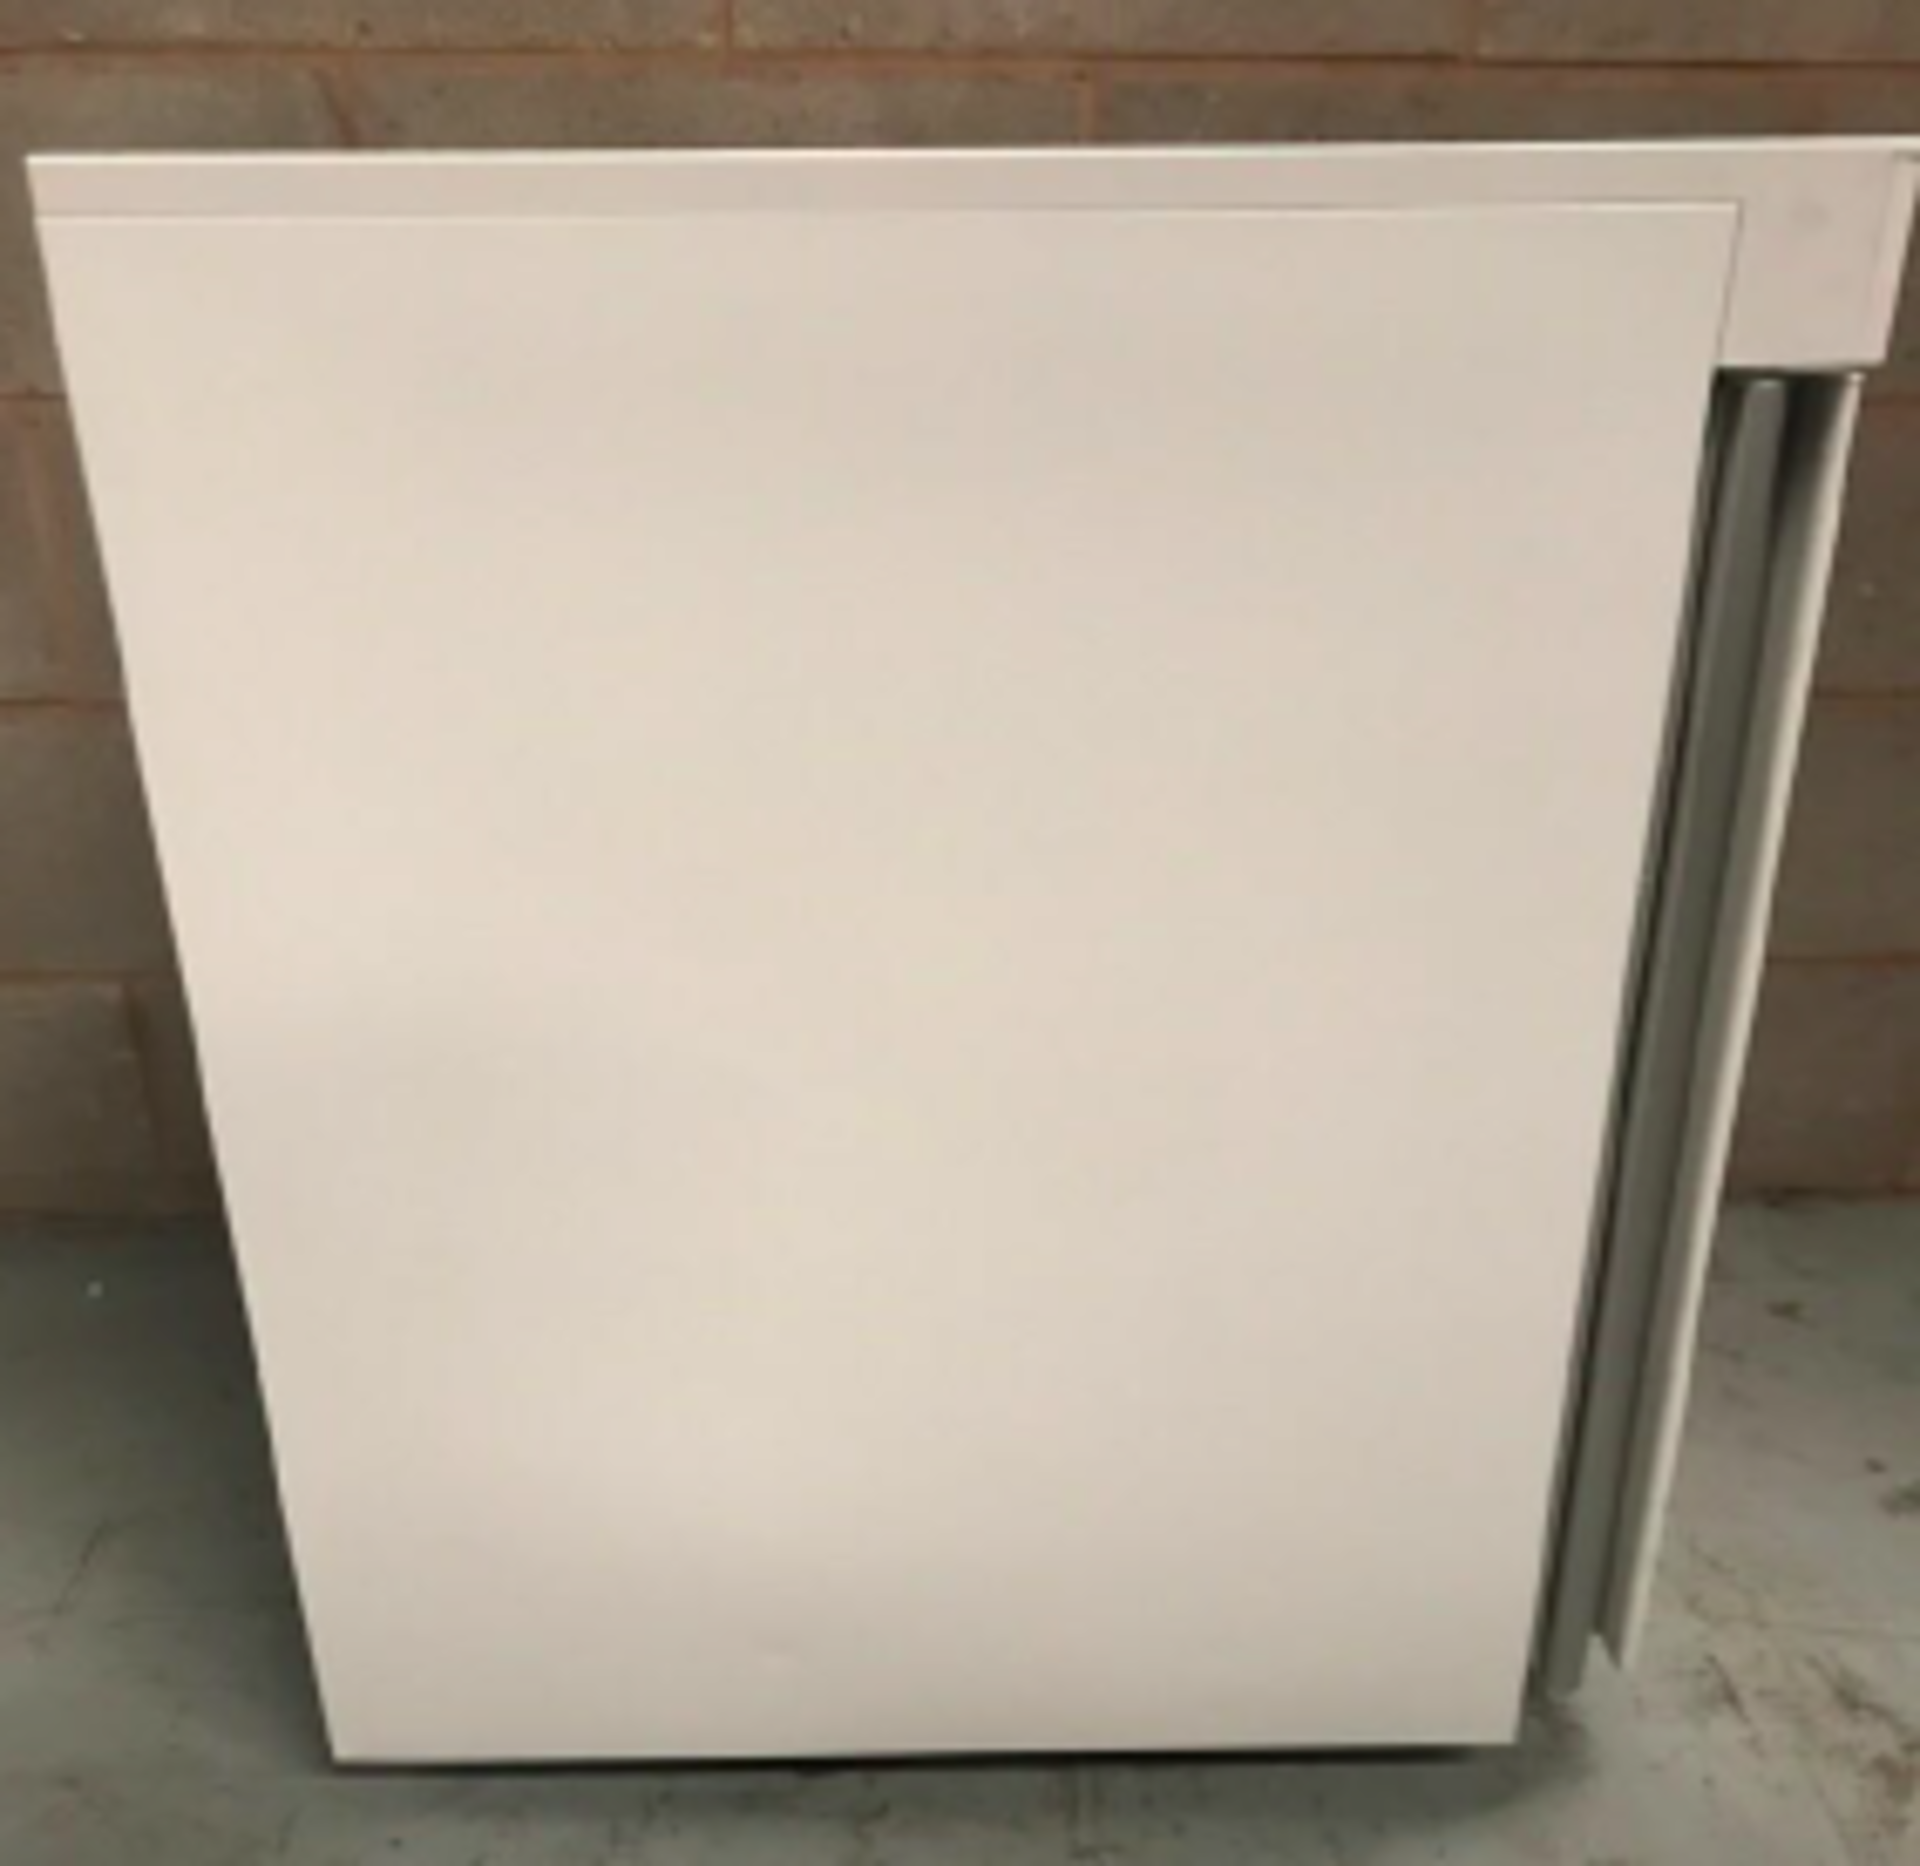 Lower height Compact 210, Refrigerator K 210 LG 3W - Image 9 of 12